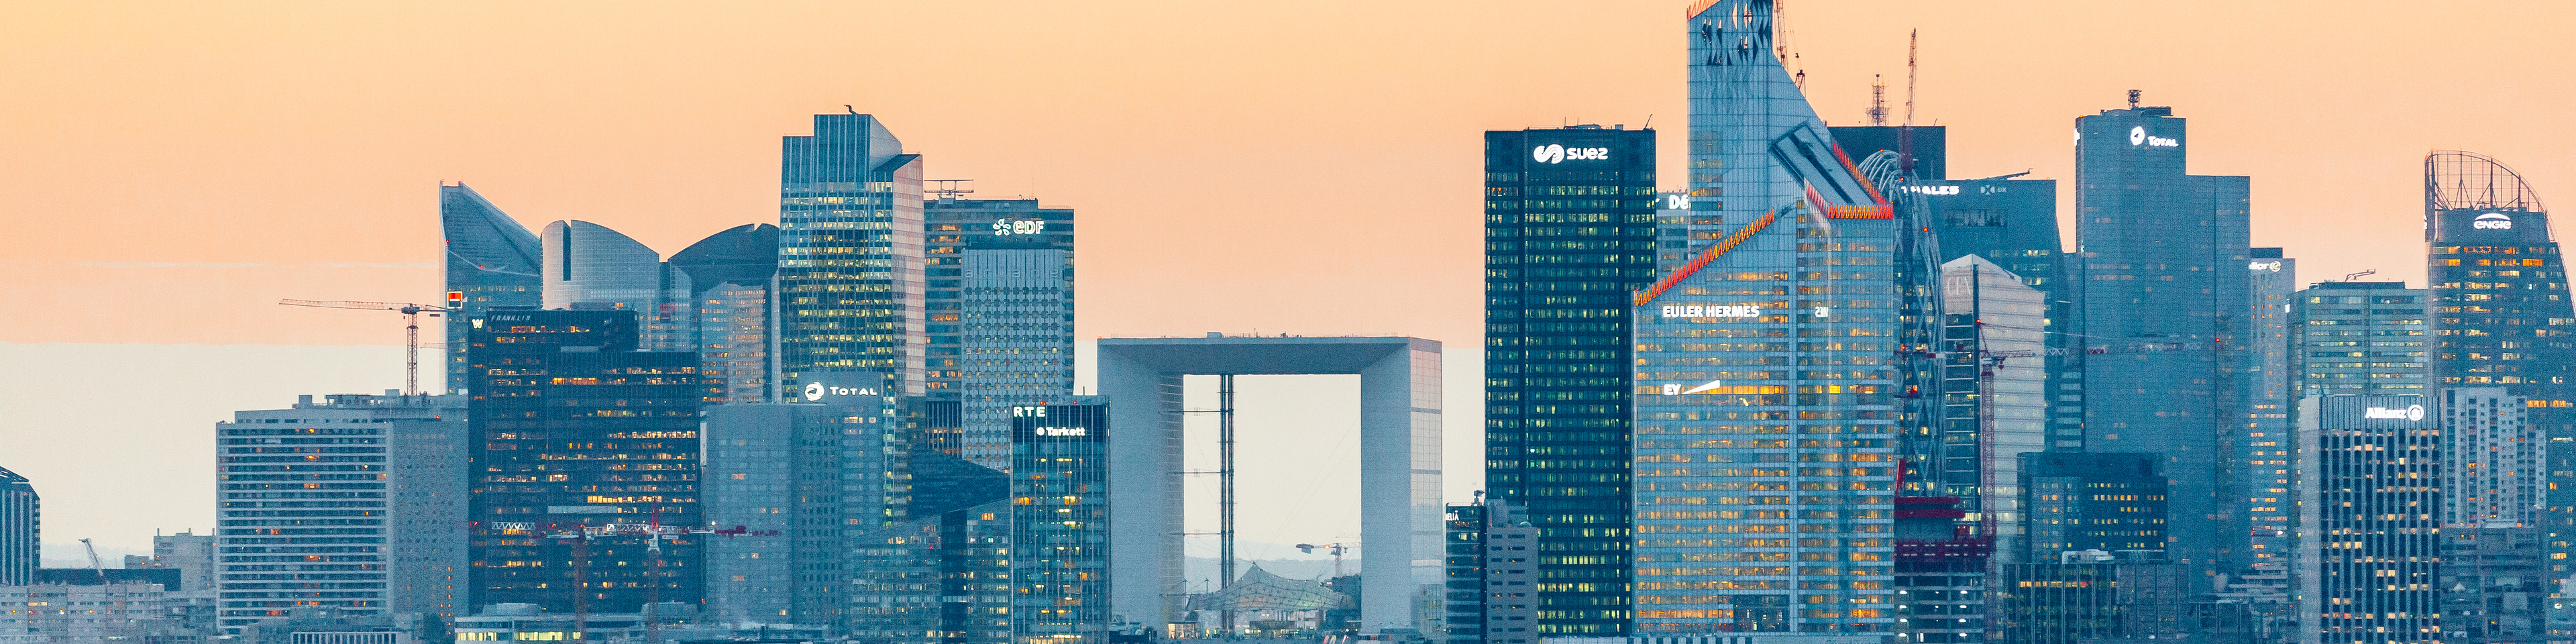 Elevated view of illuminated skyscrapers at La Defense financial district and Avenue des Champs-Elysees at dusk, Paris, France